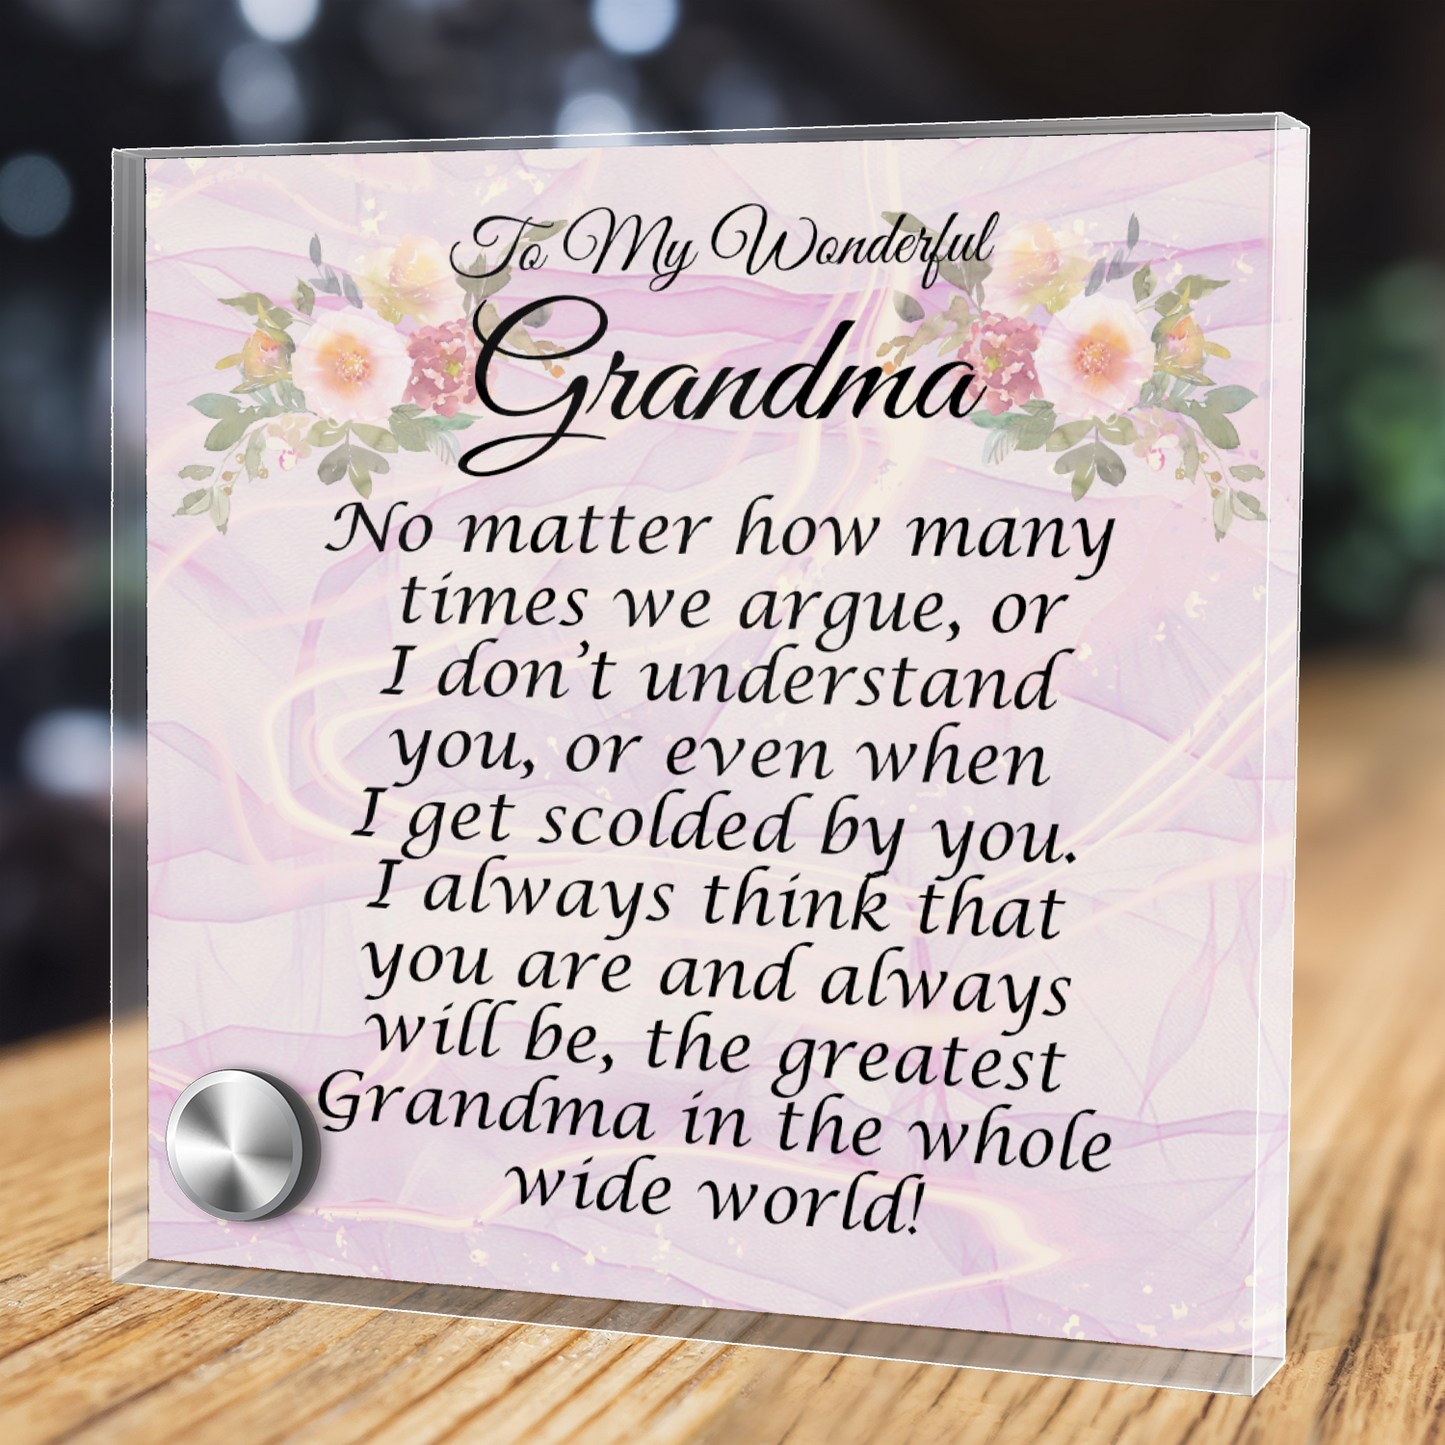 To My Wonderful Grandma Pendant Necklace and Lumen Glass Message Display Stand